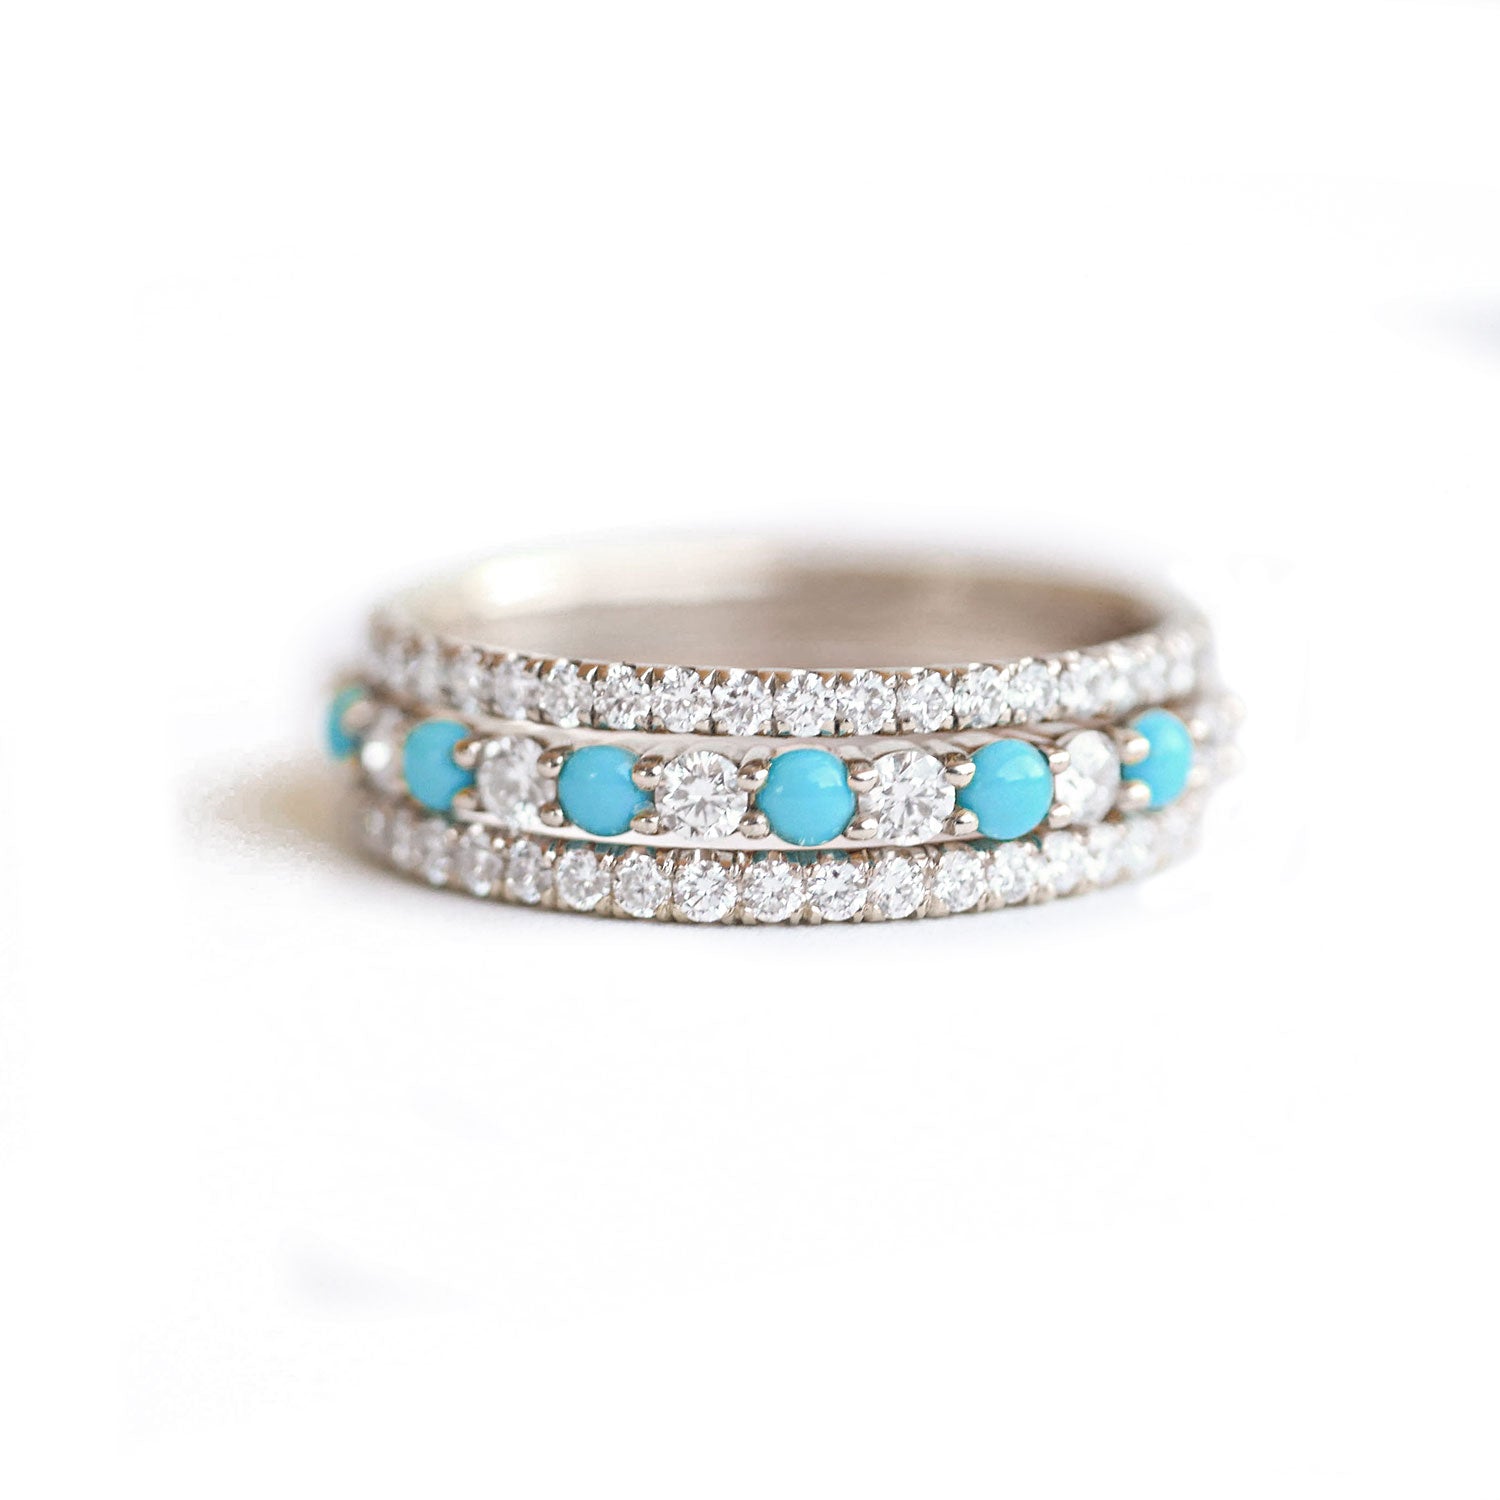 2mm Turquoise & Diamond Delicate Stacking Ring Set | Berlinger Jewelry